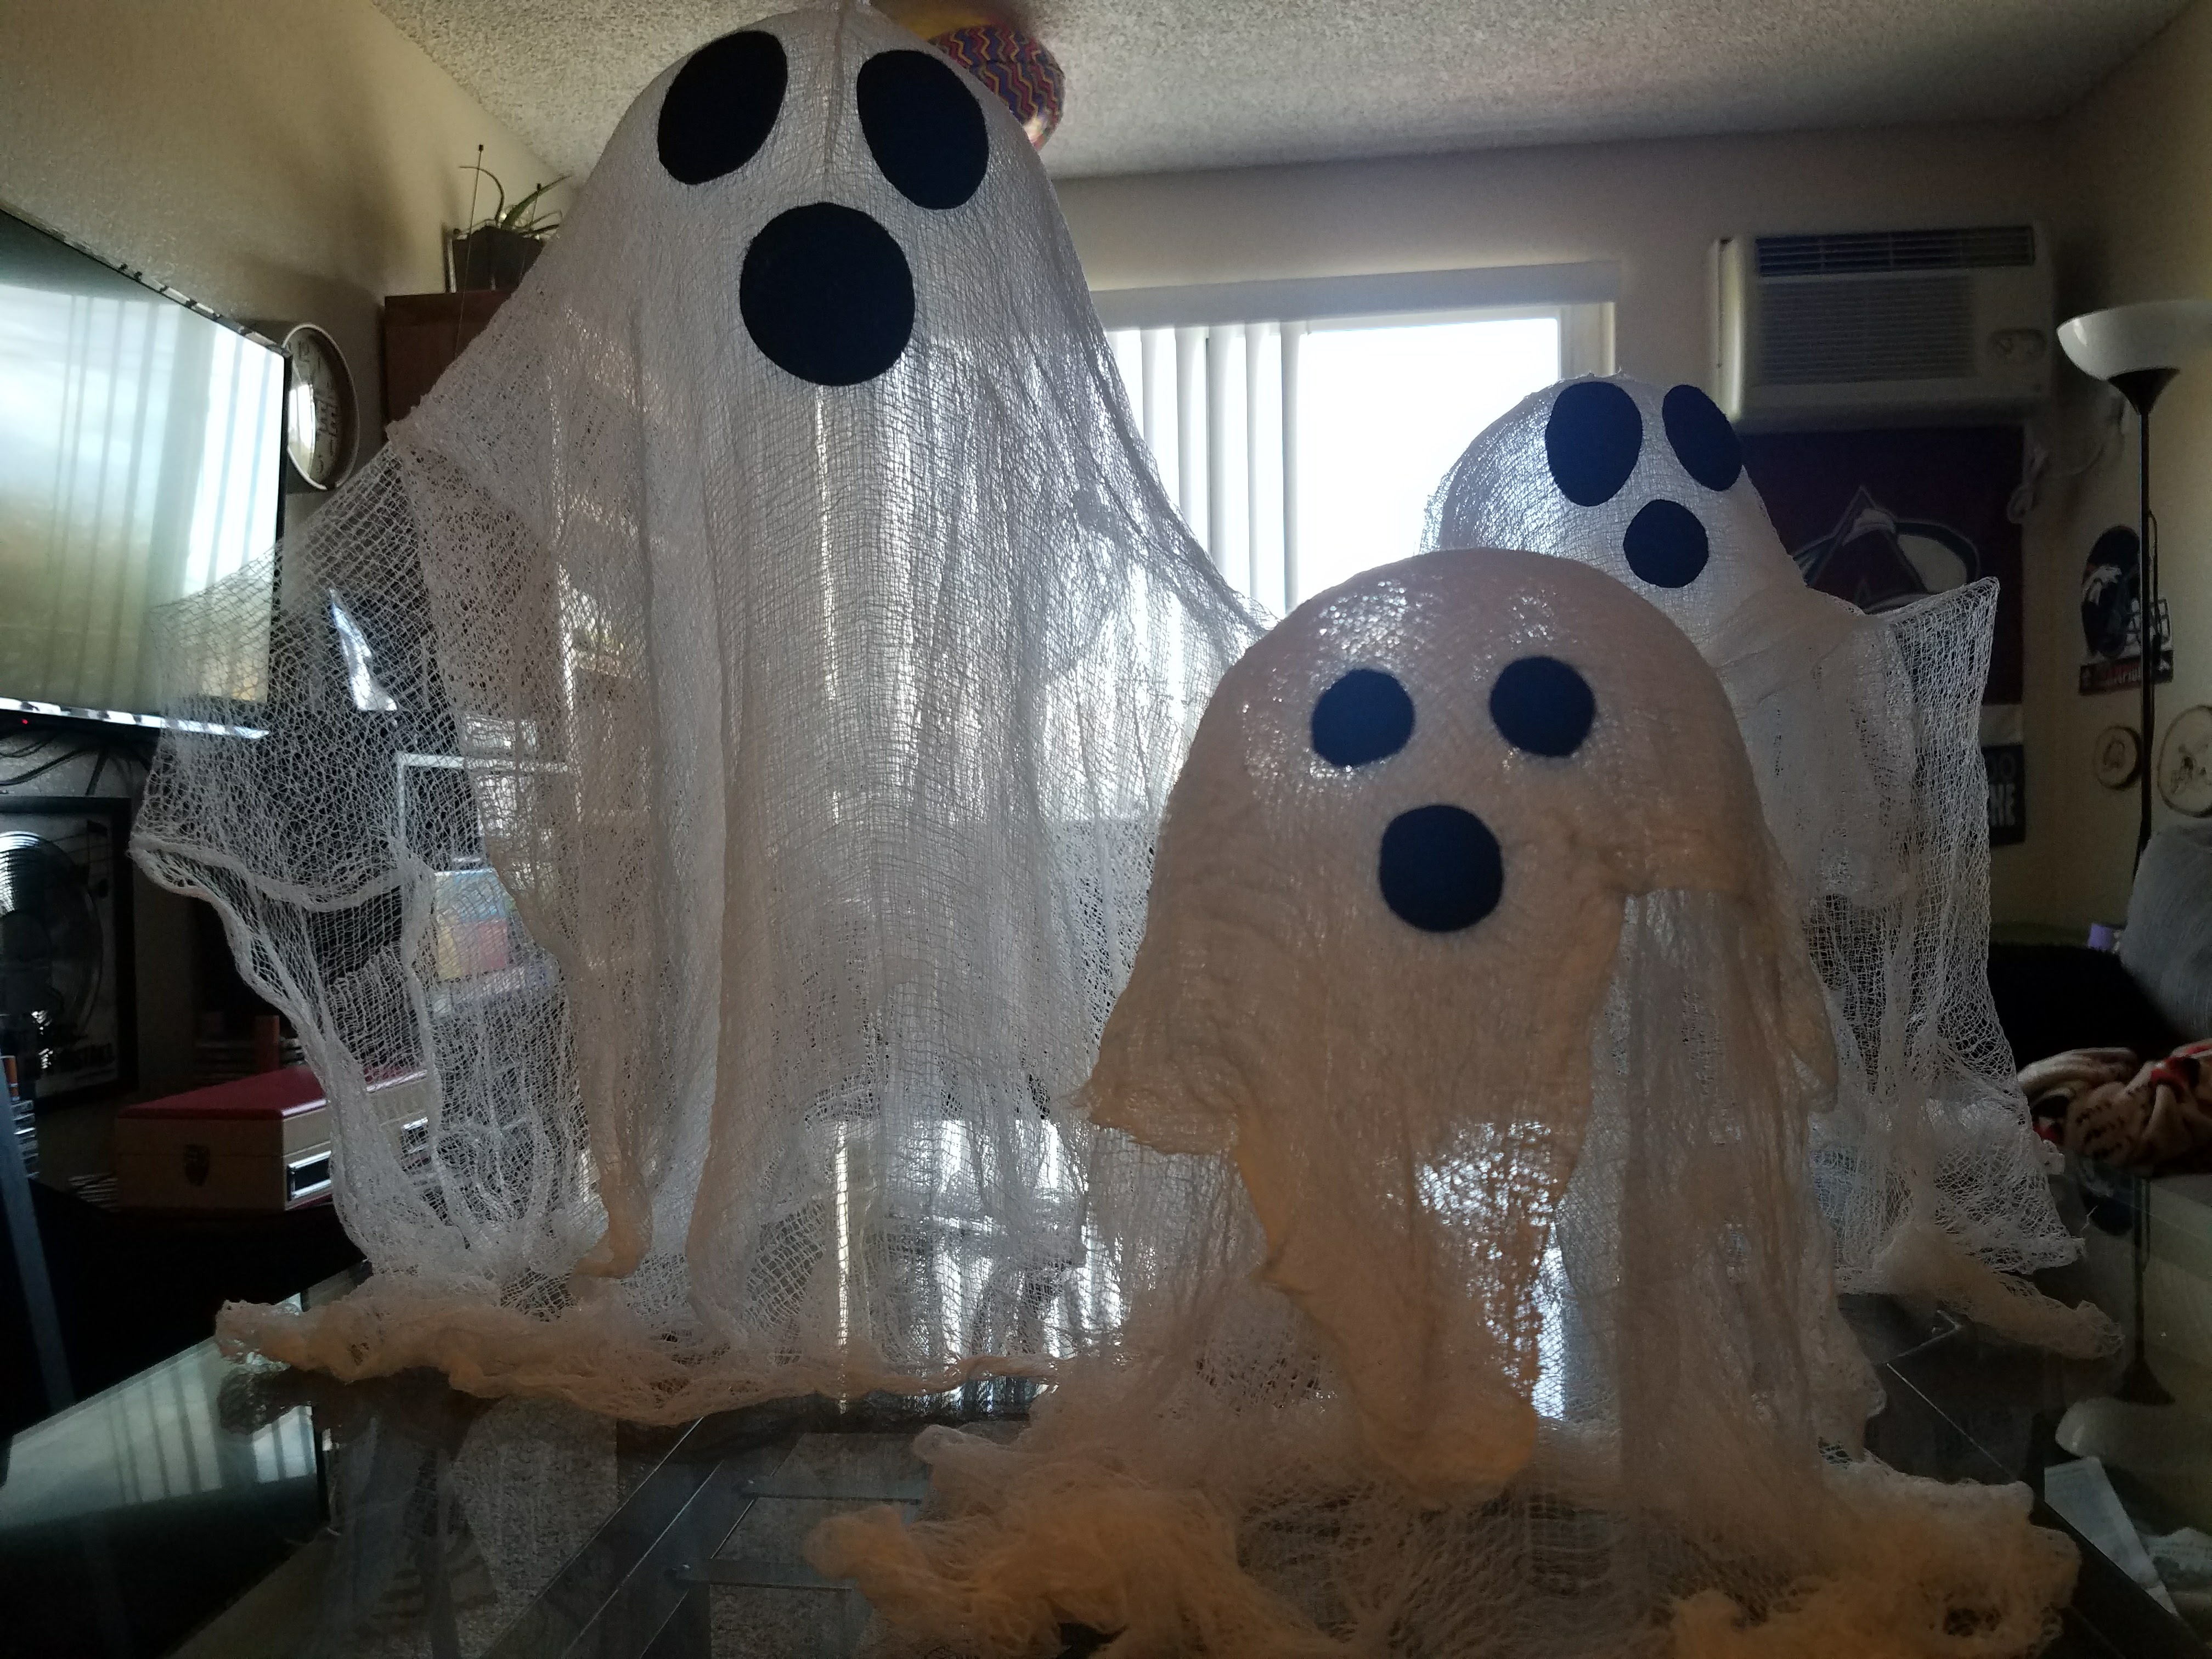 How to make cheesecloth ghosts for Halloween | 9news.com